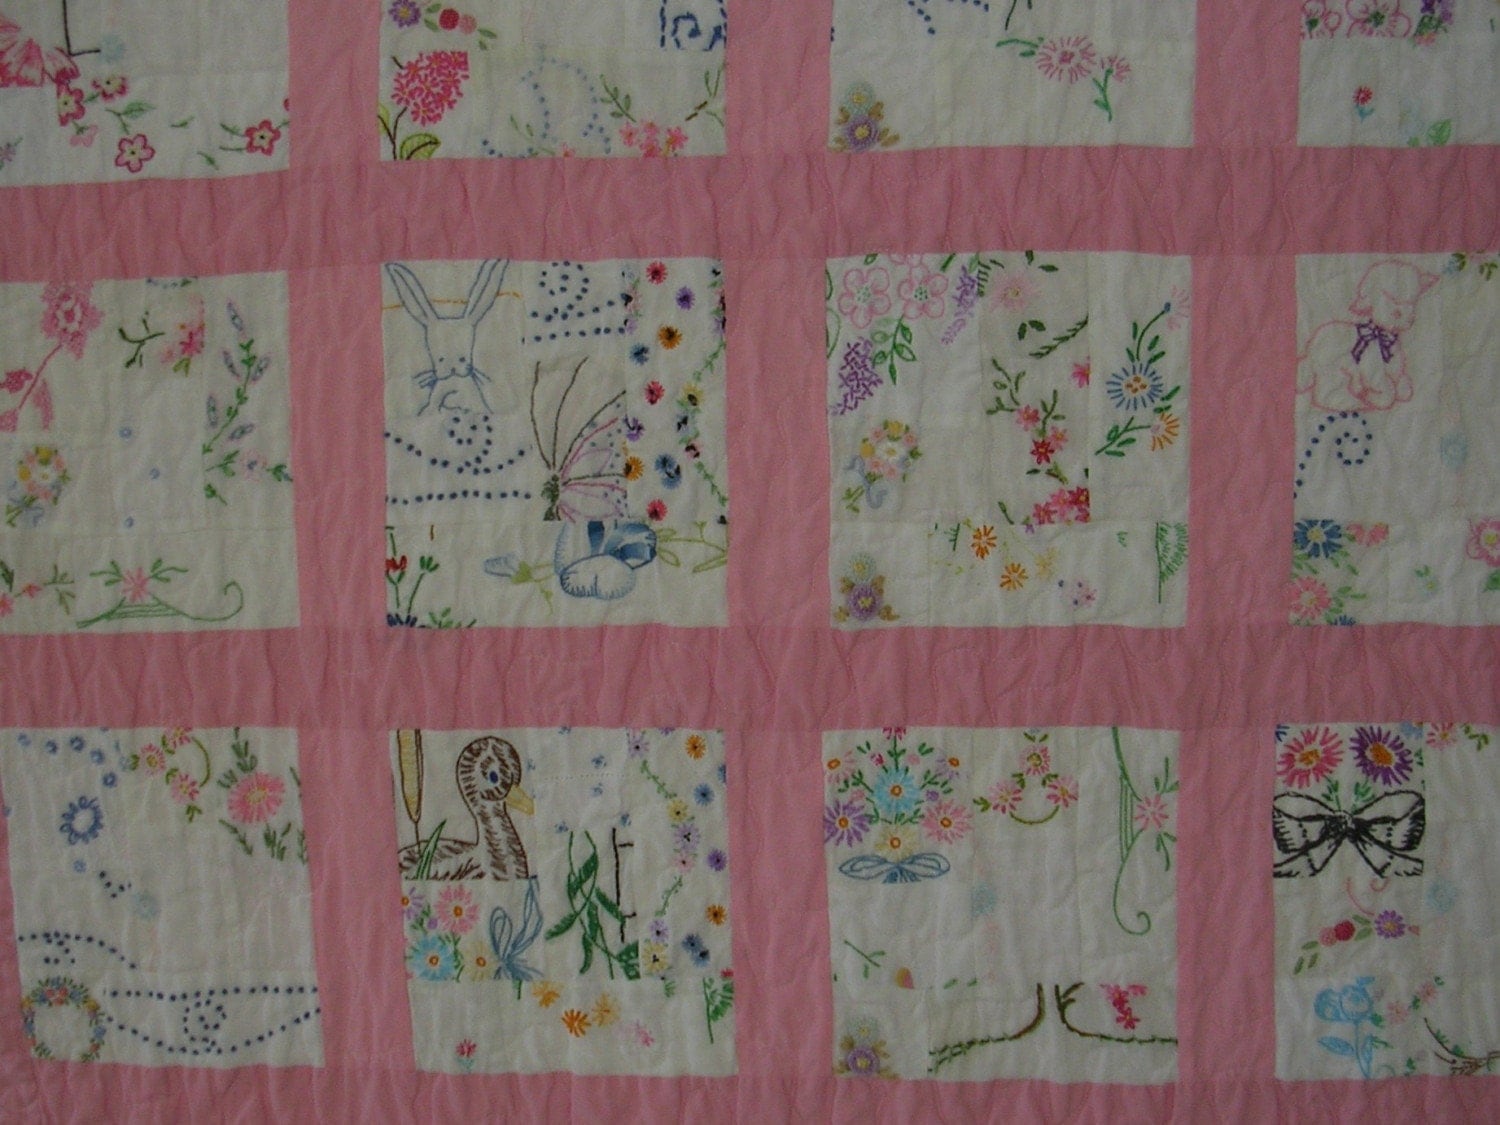 Amazon.com: Embroidery Quilt Kits